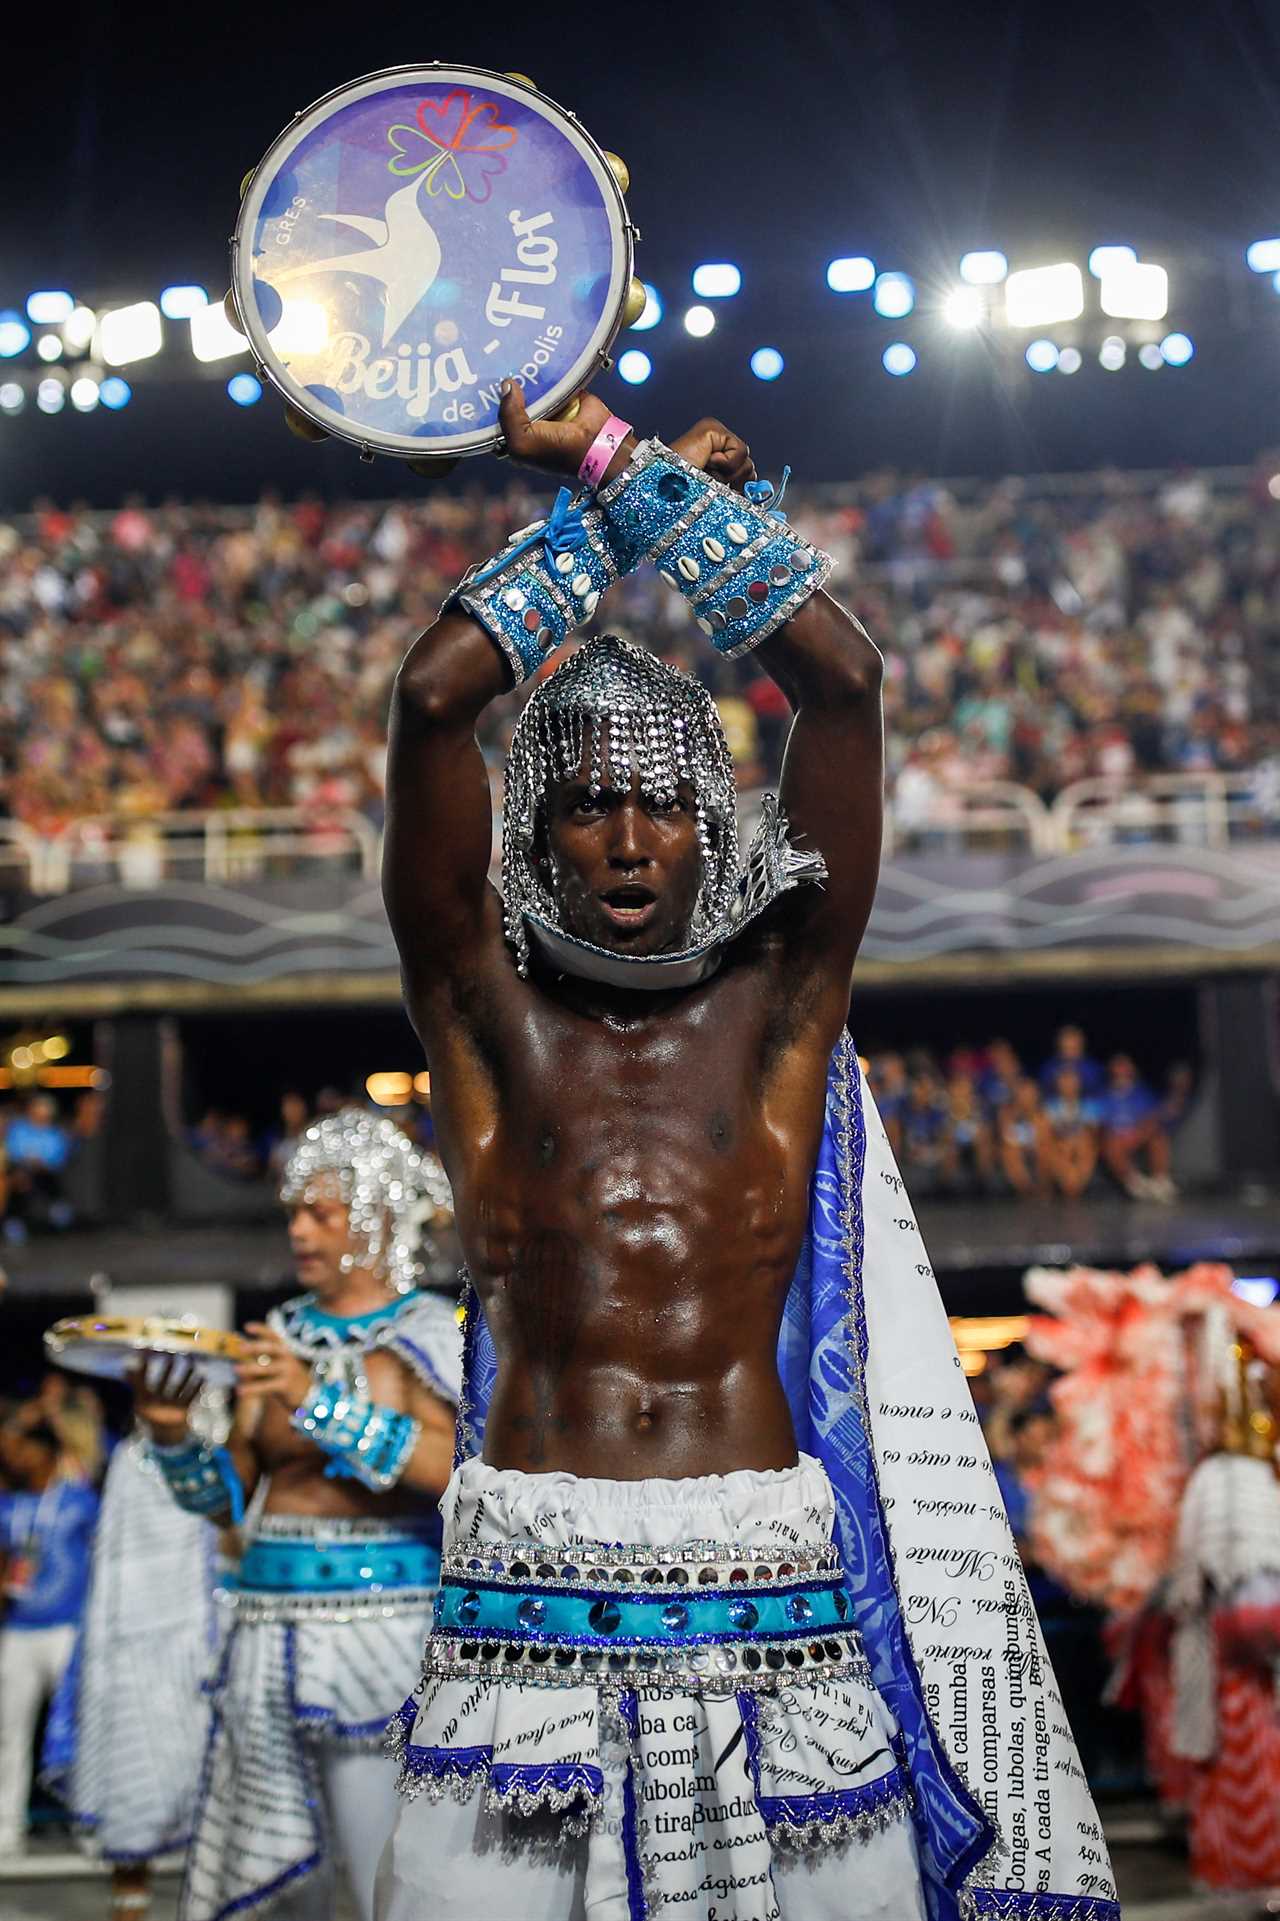 Carnival returns to Rio de Janeiro after two years due to Covid pandemic in explosion of colour and music